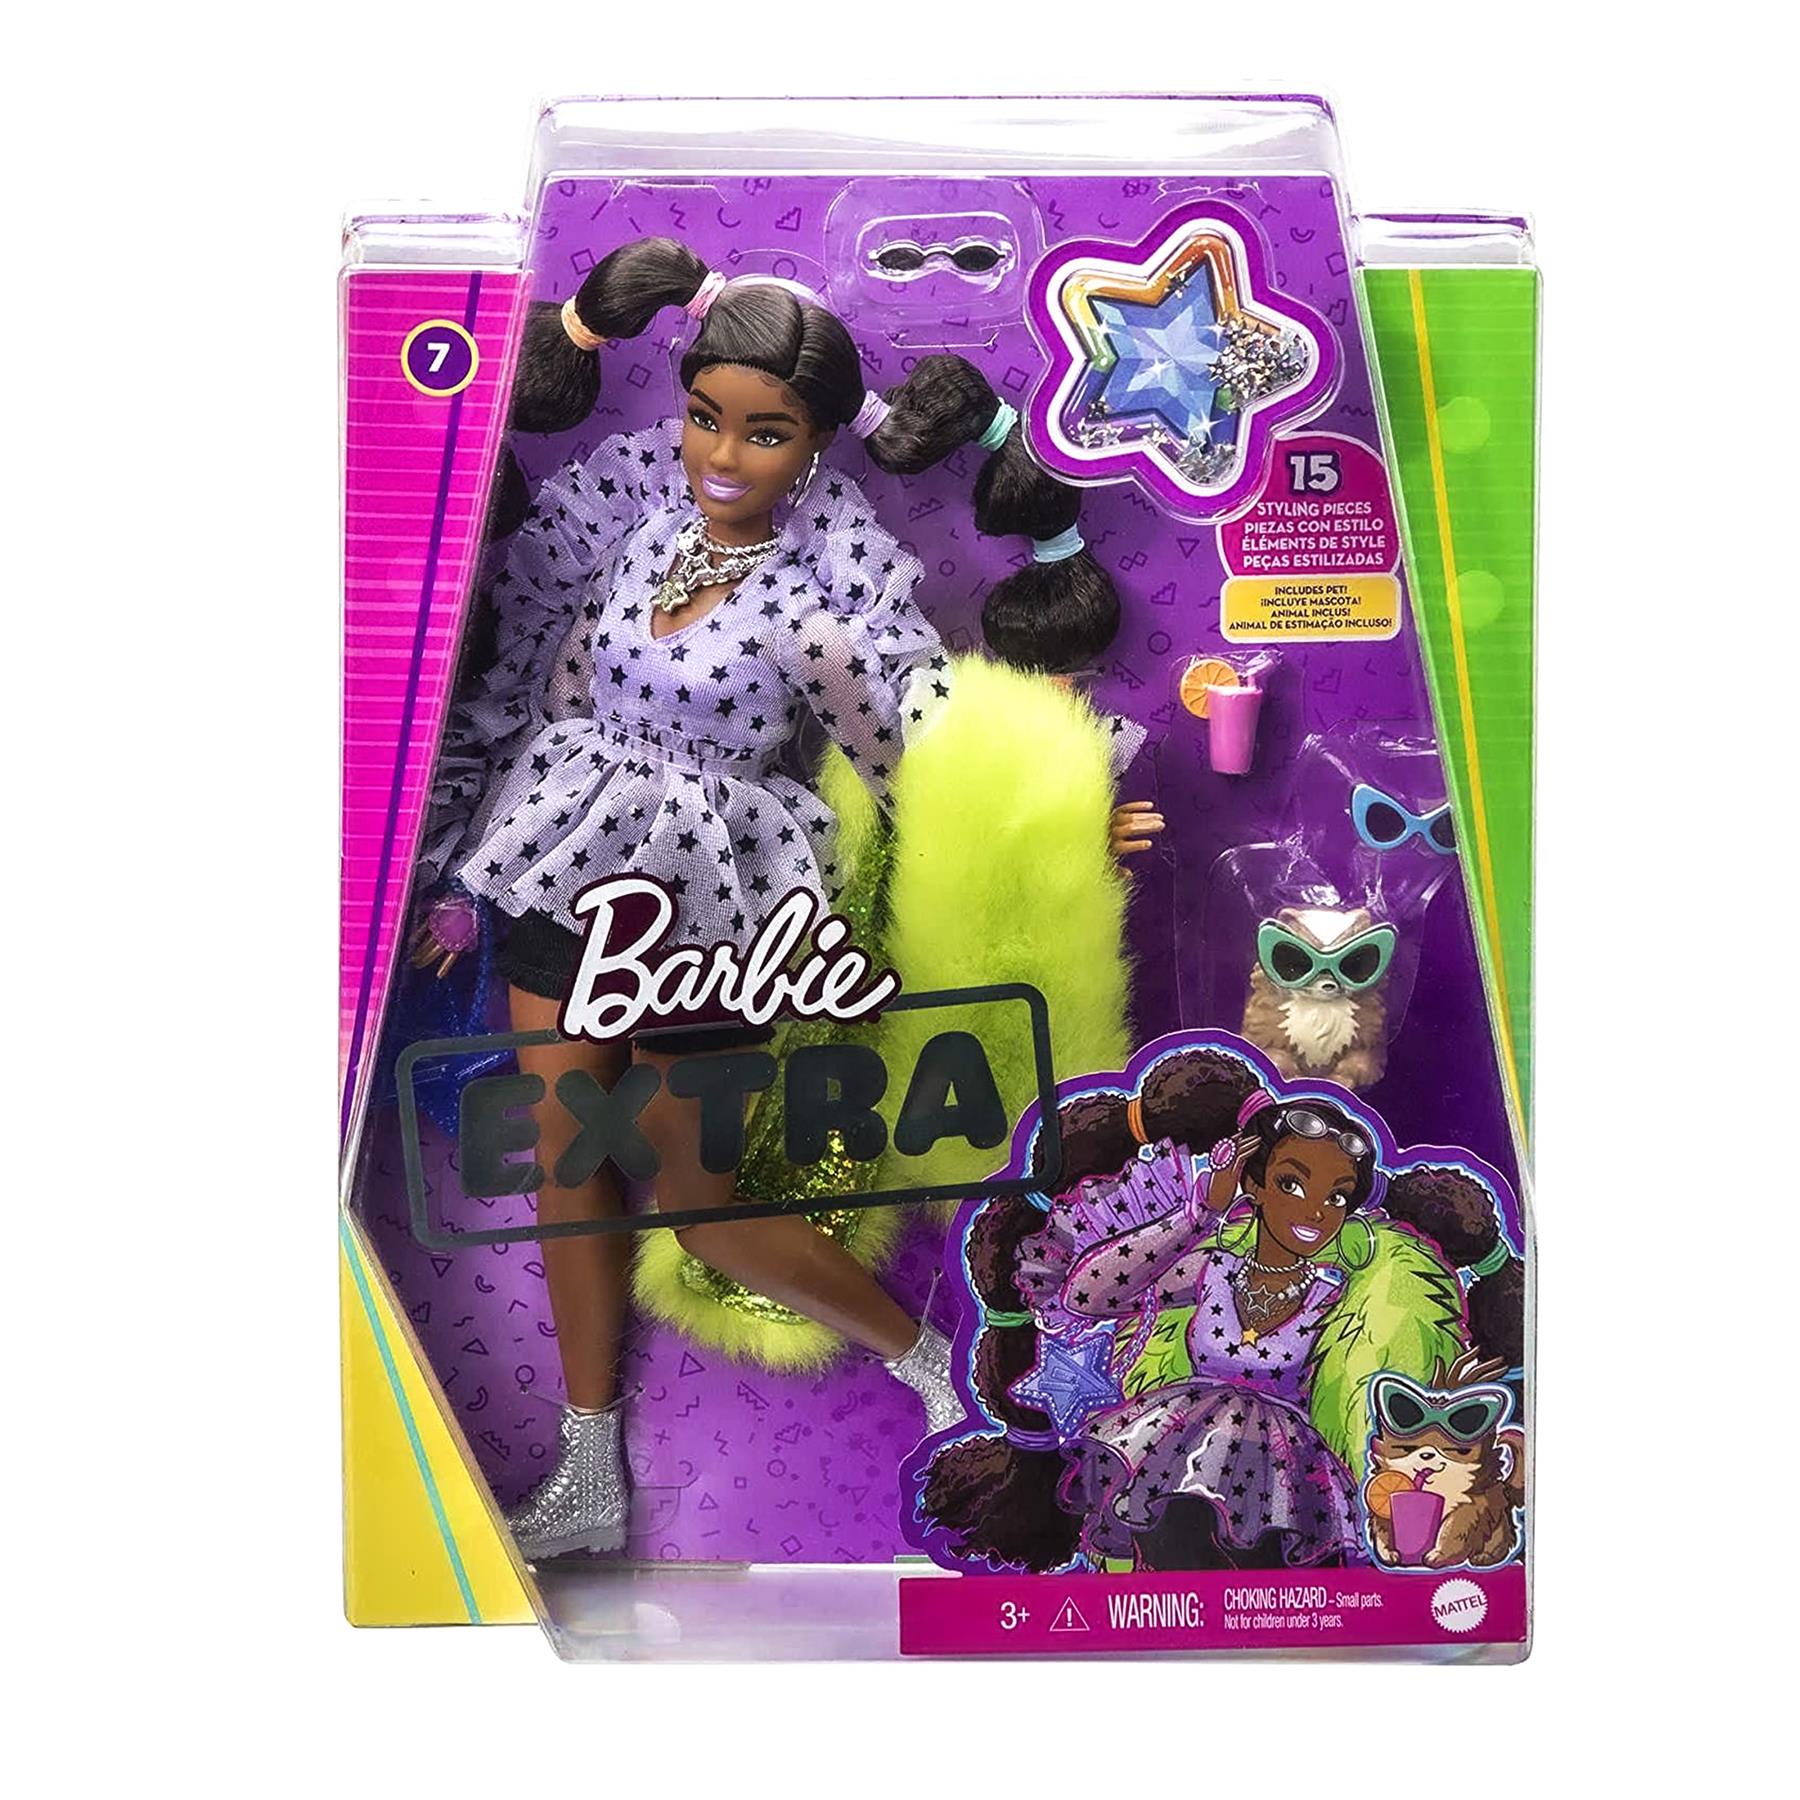 Barbie Doll Barbie Extra Doll with Pigtails and Bobble Hair Playset